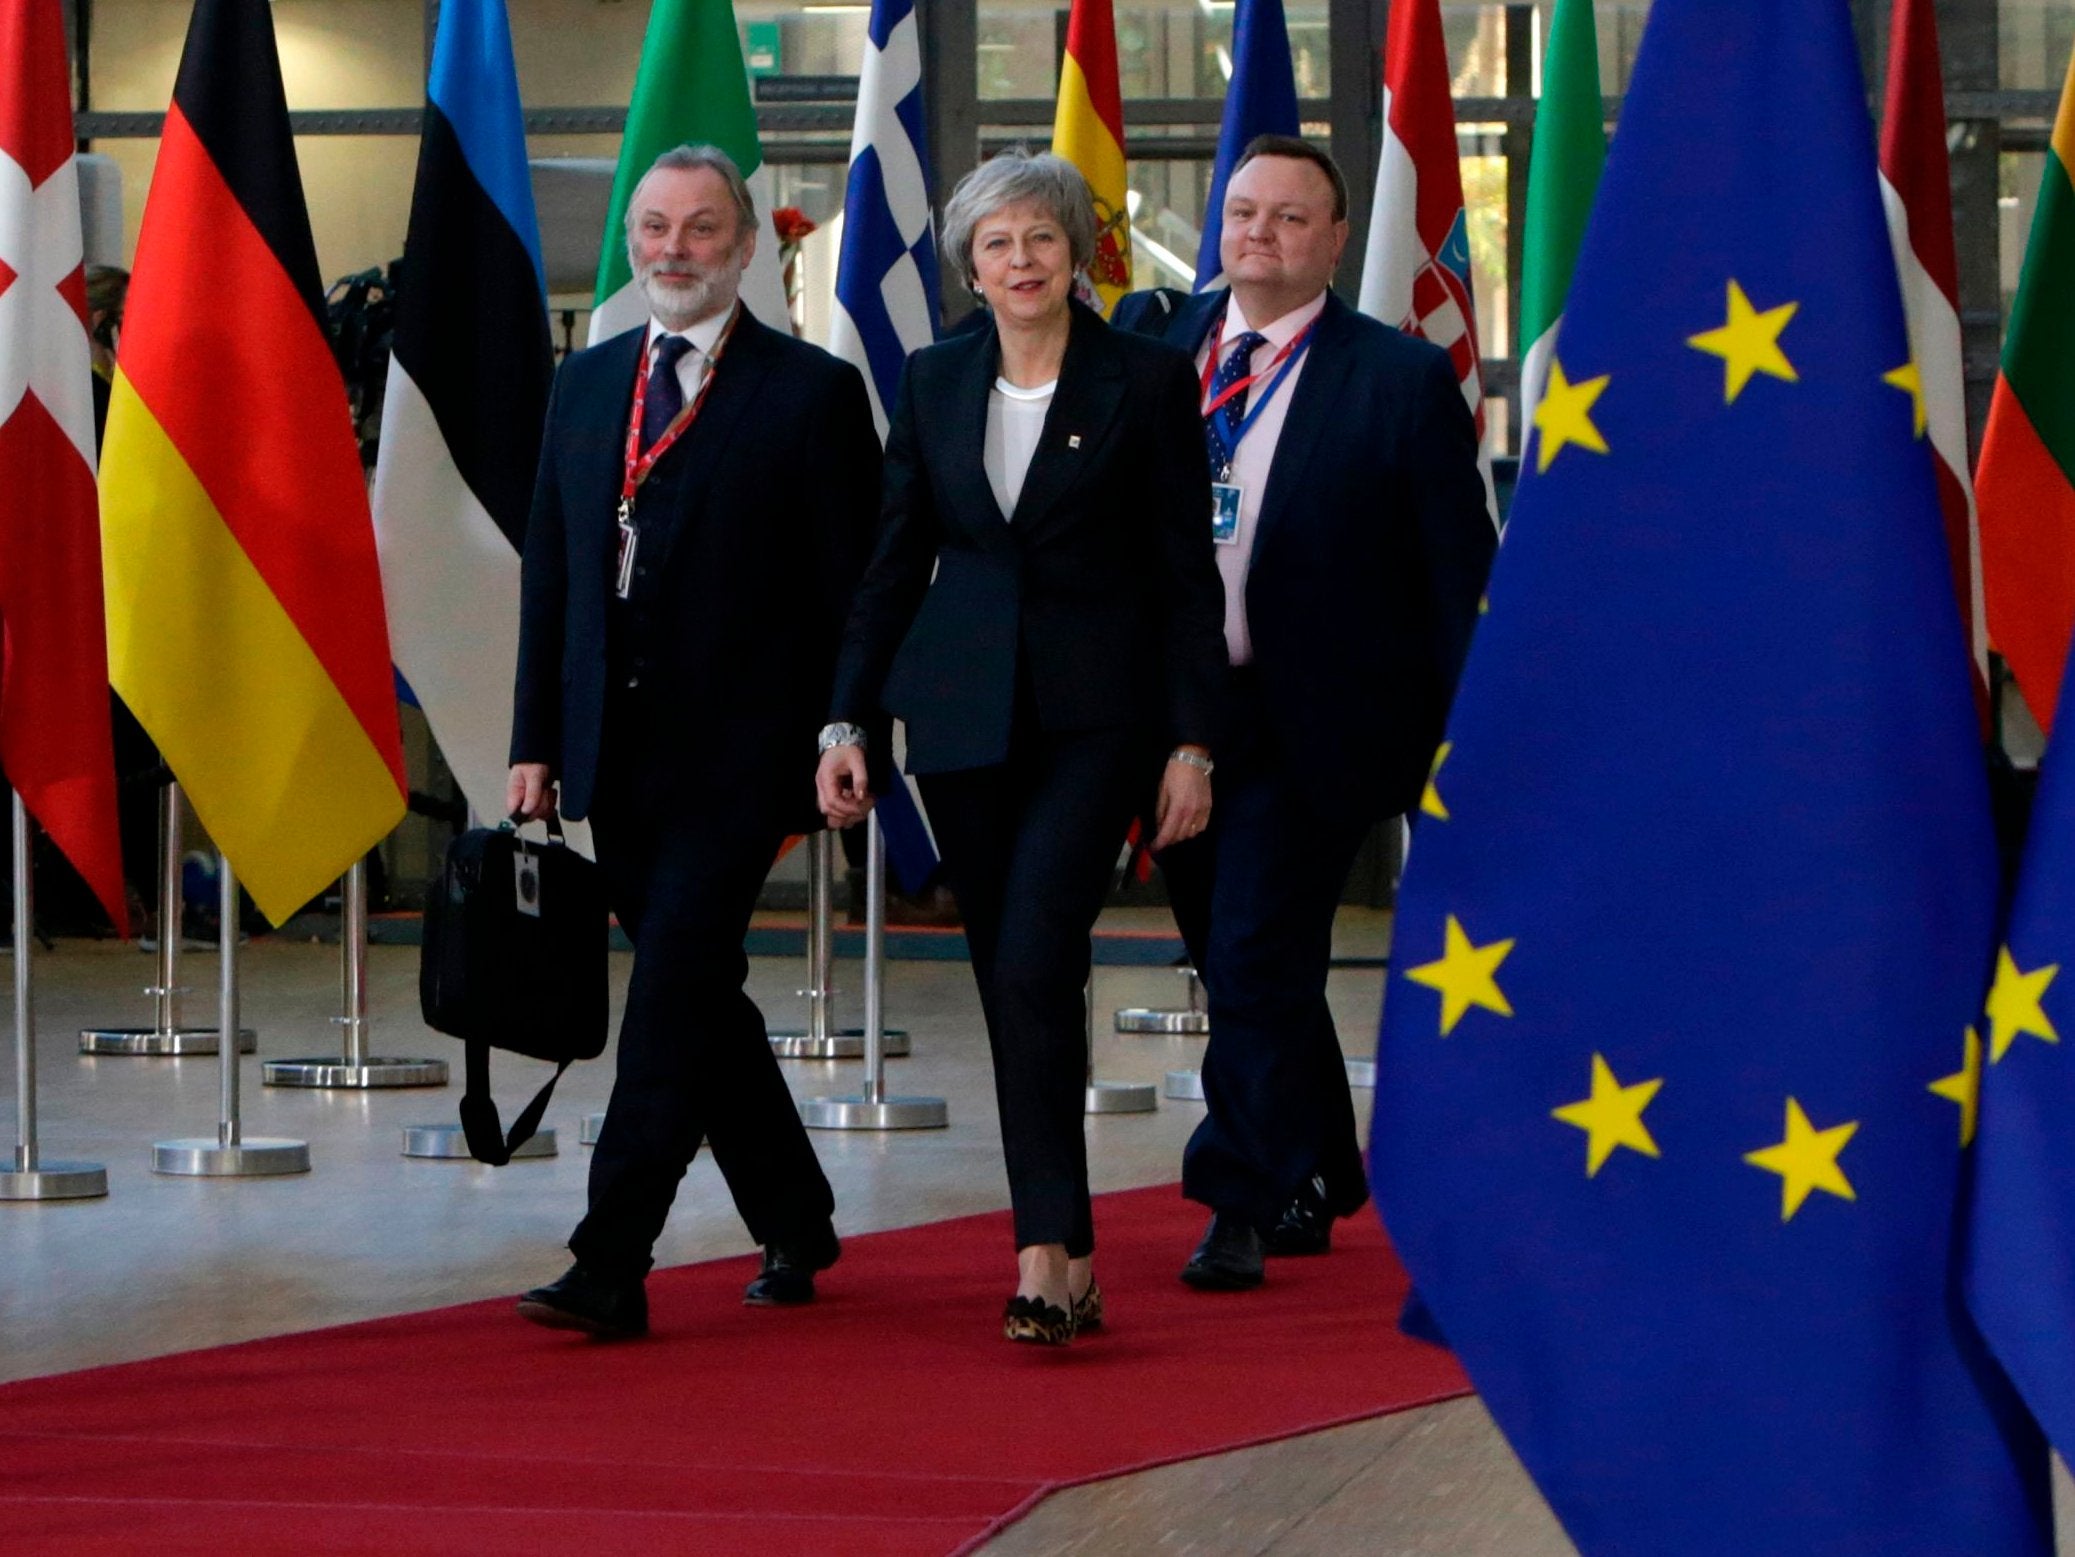 Theresa May arrives on Thursday in Brussels for a European summit aimed at discussing the Brexit deal